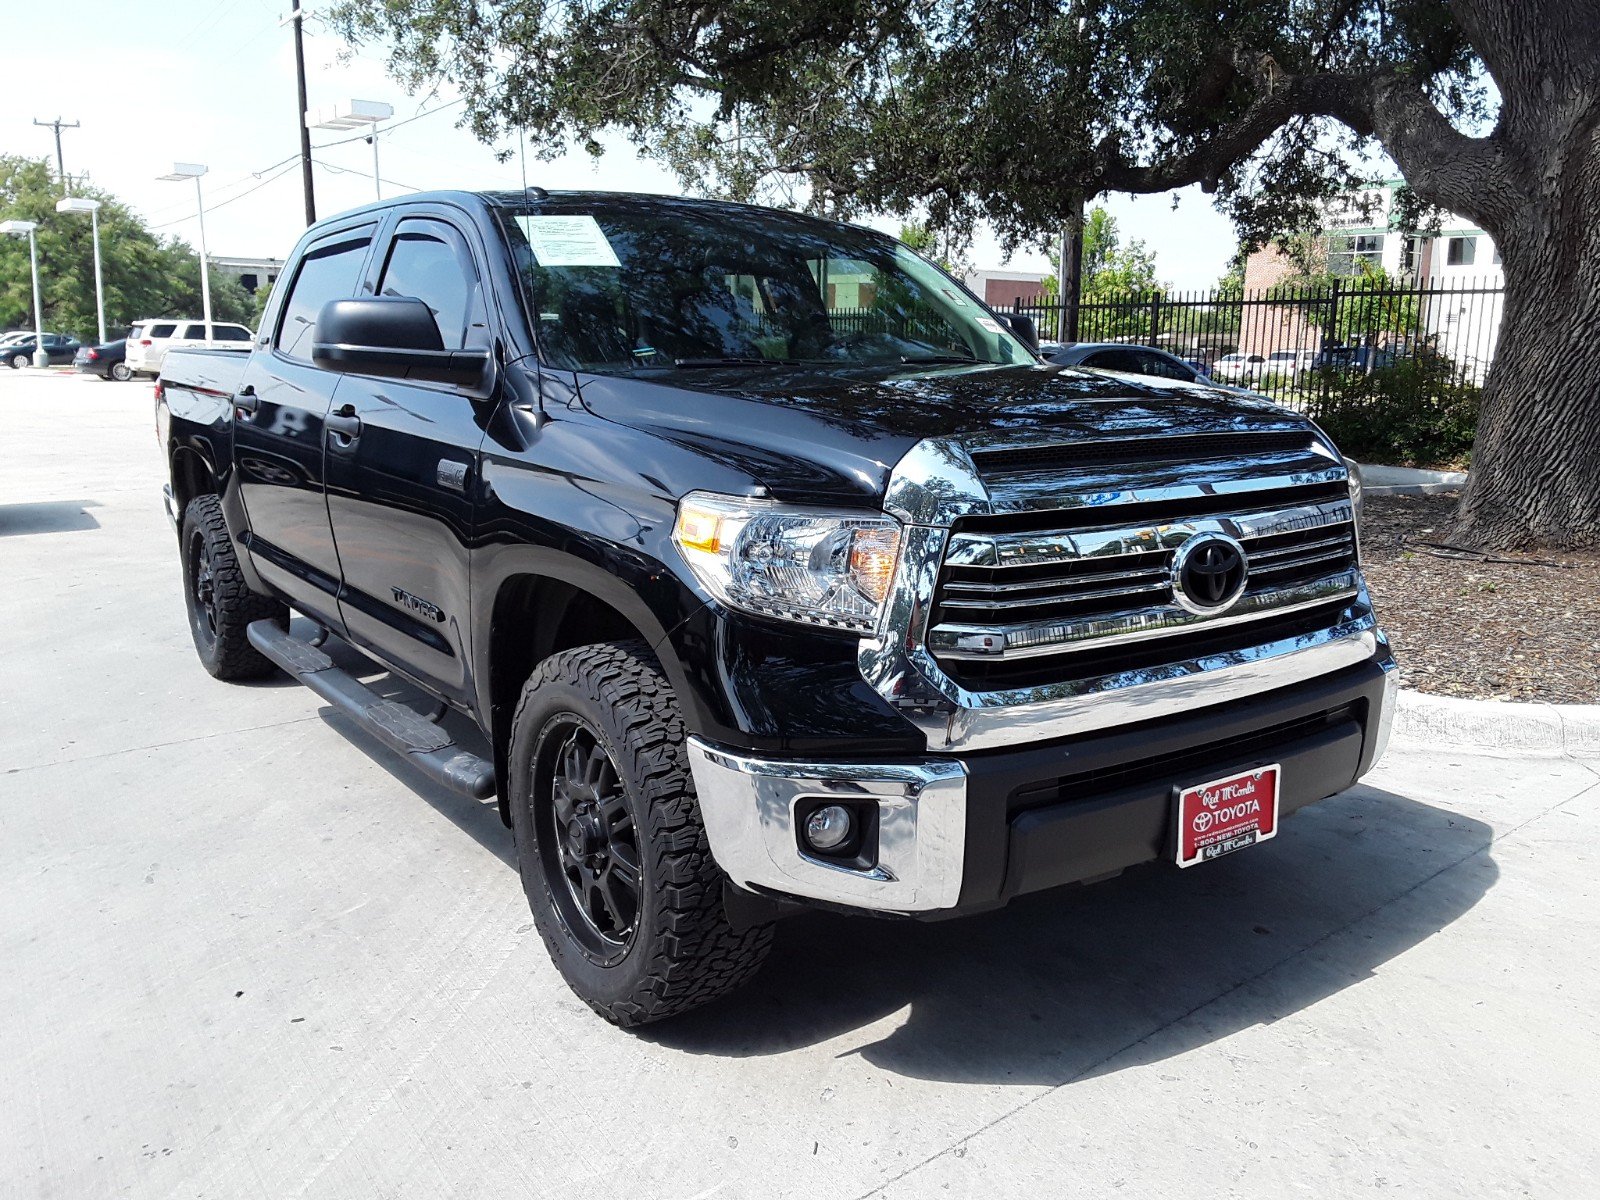 Pre-Owned 2017 Toyota Tundra SR5 TSS Off-Road Crew Cab Pickup in San